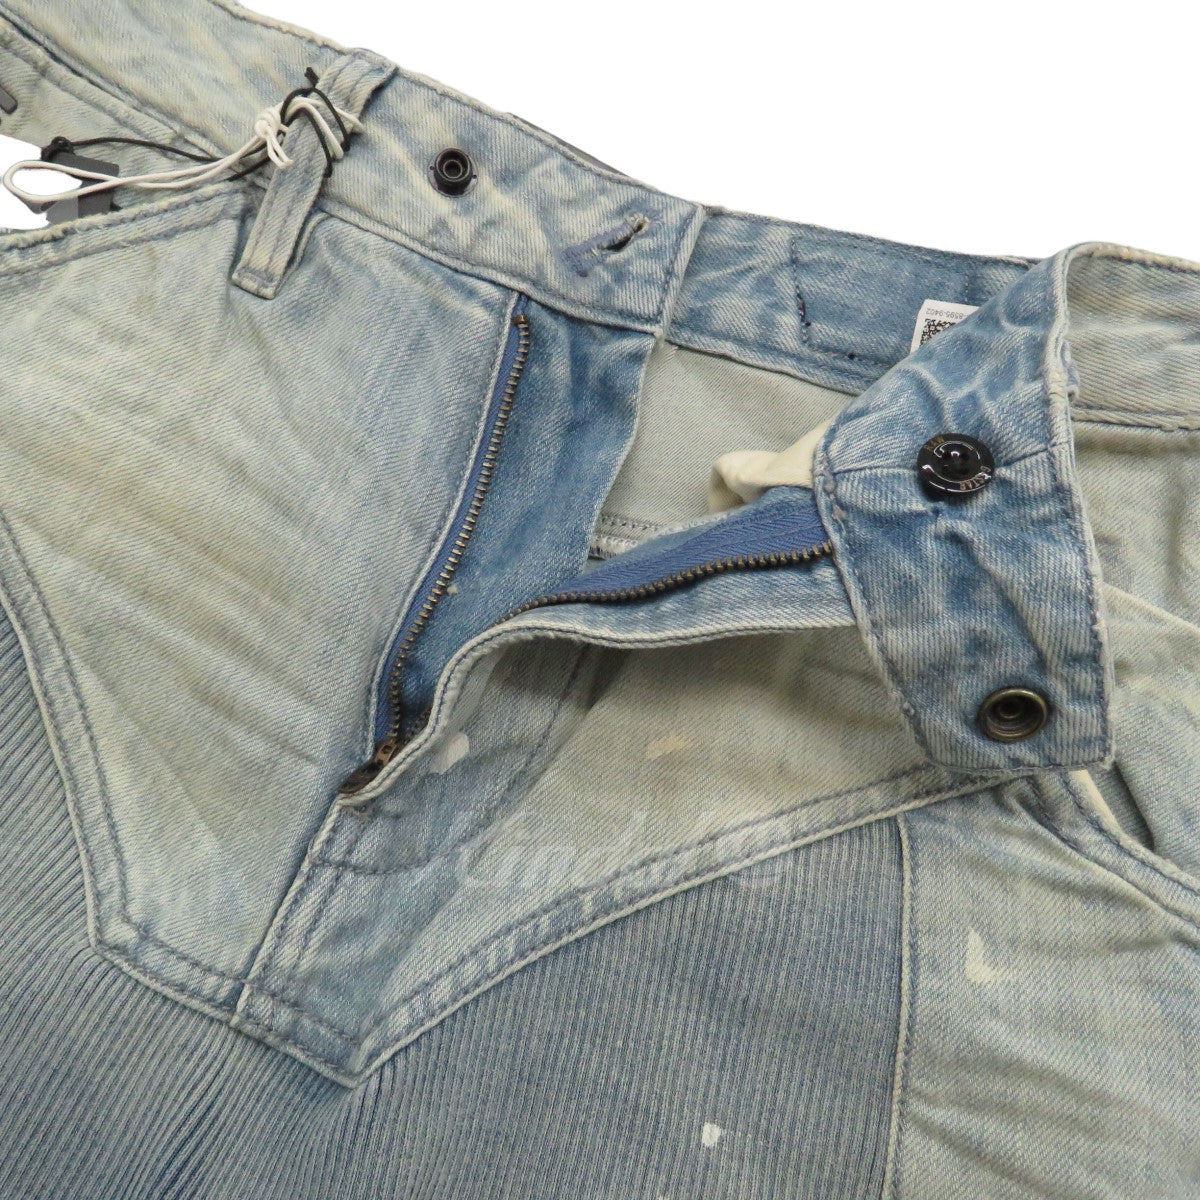 G-STAR RAW(ジースター・ロウ) MOTAC-X 3D RELAXED TAPERED 切替デニムパンツ